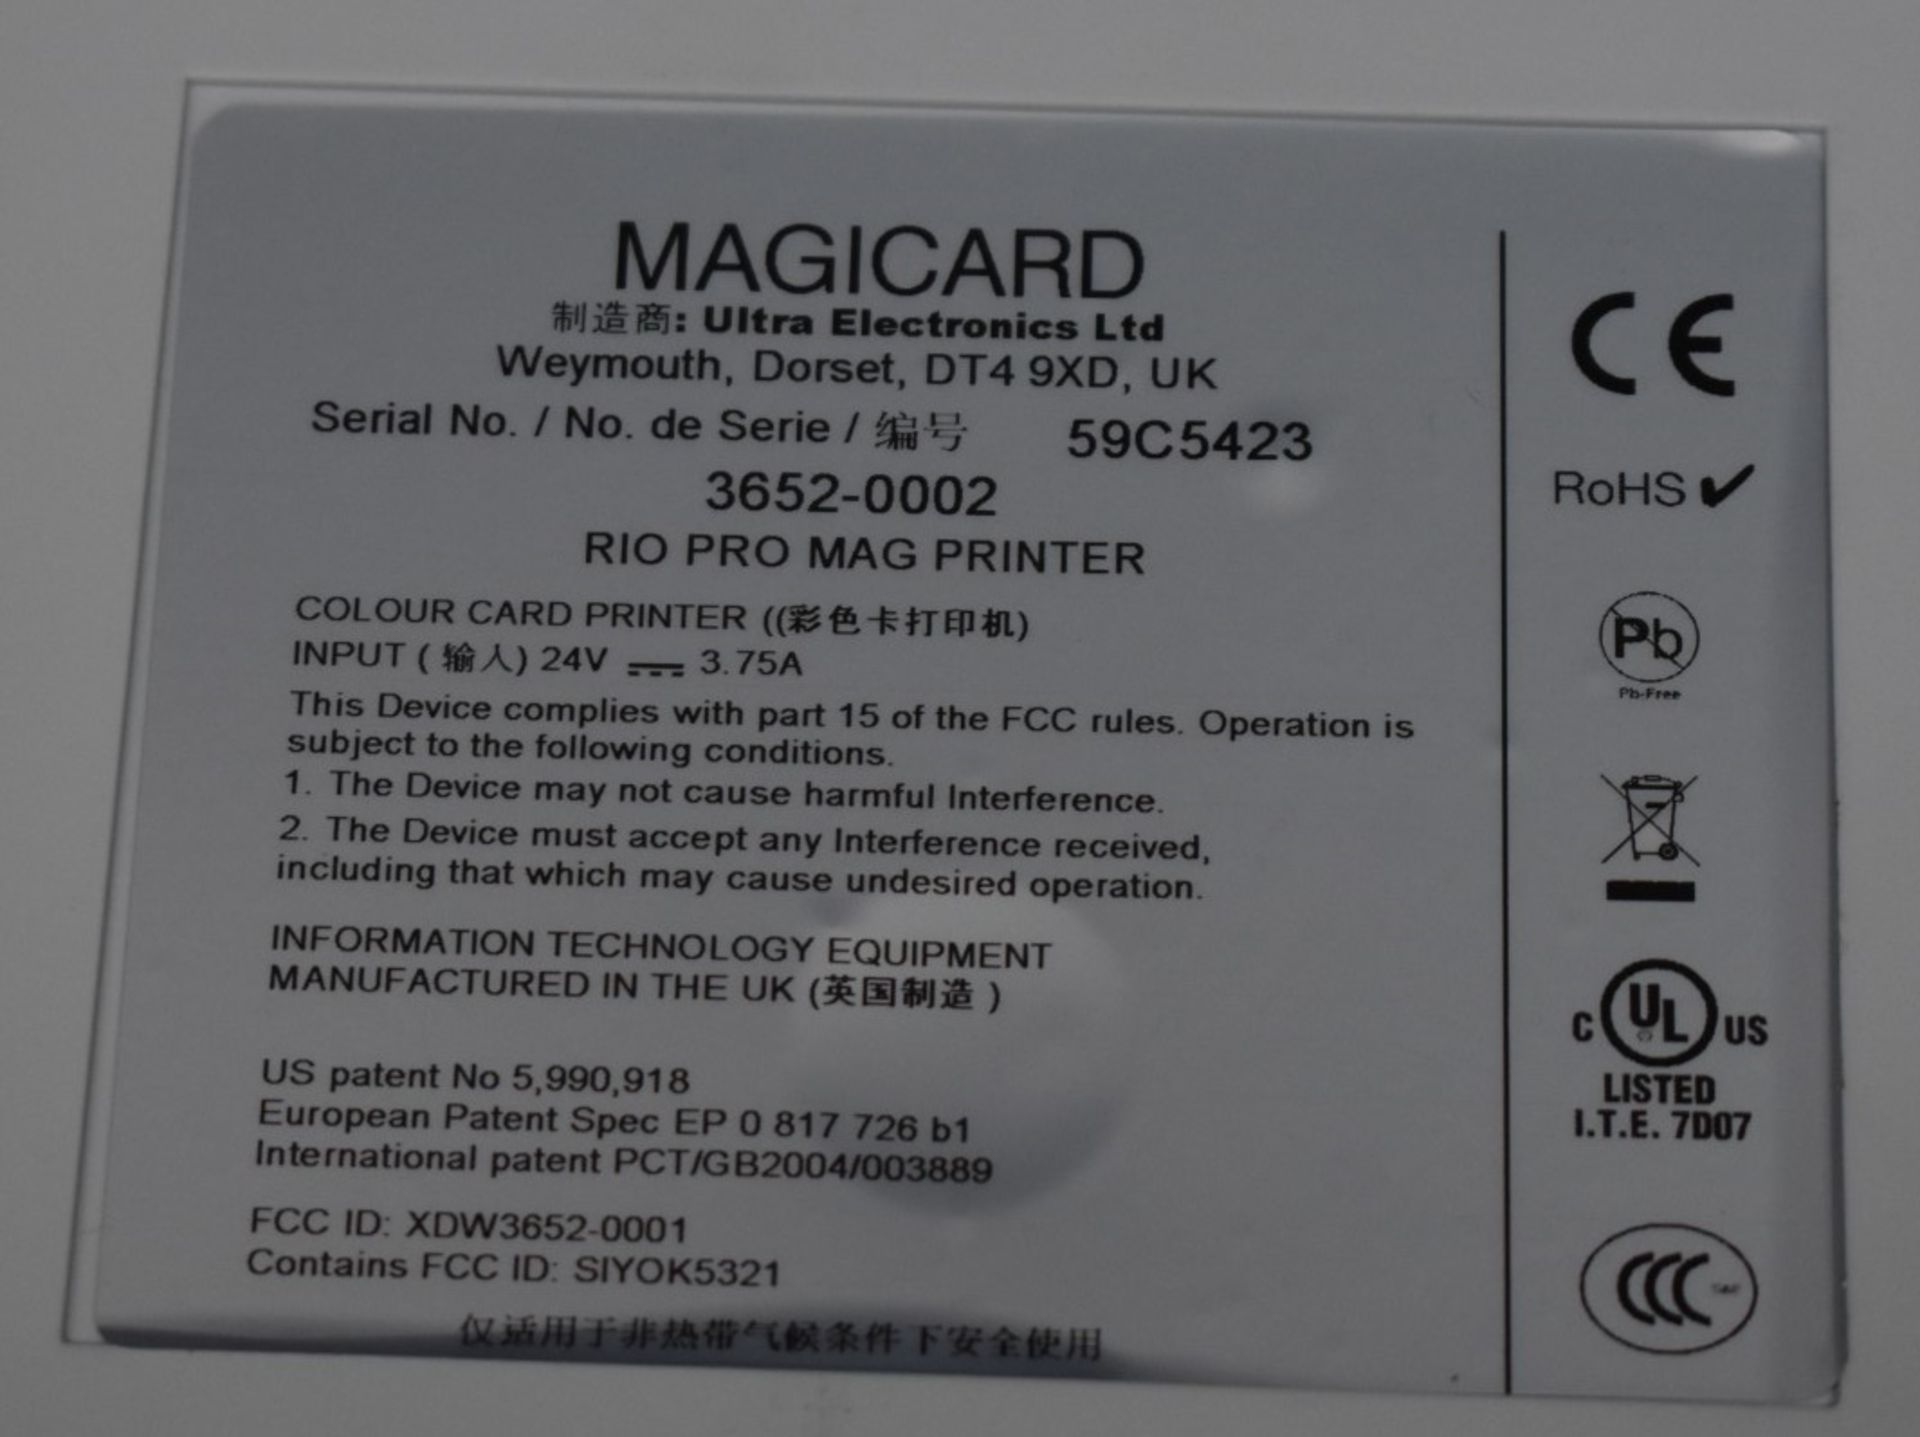 1 x Magicard Rio Pro Mag ID Printer - Model 3652-0002 - Includes Cables - Ref: In2116 Pal1 WH1 - - Image 4 of 6